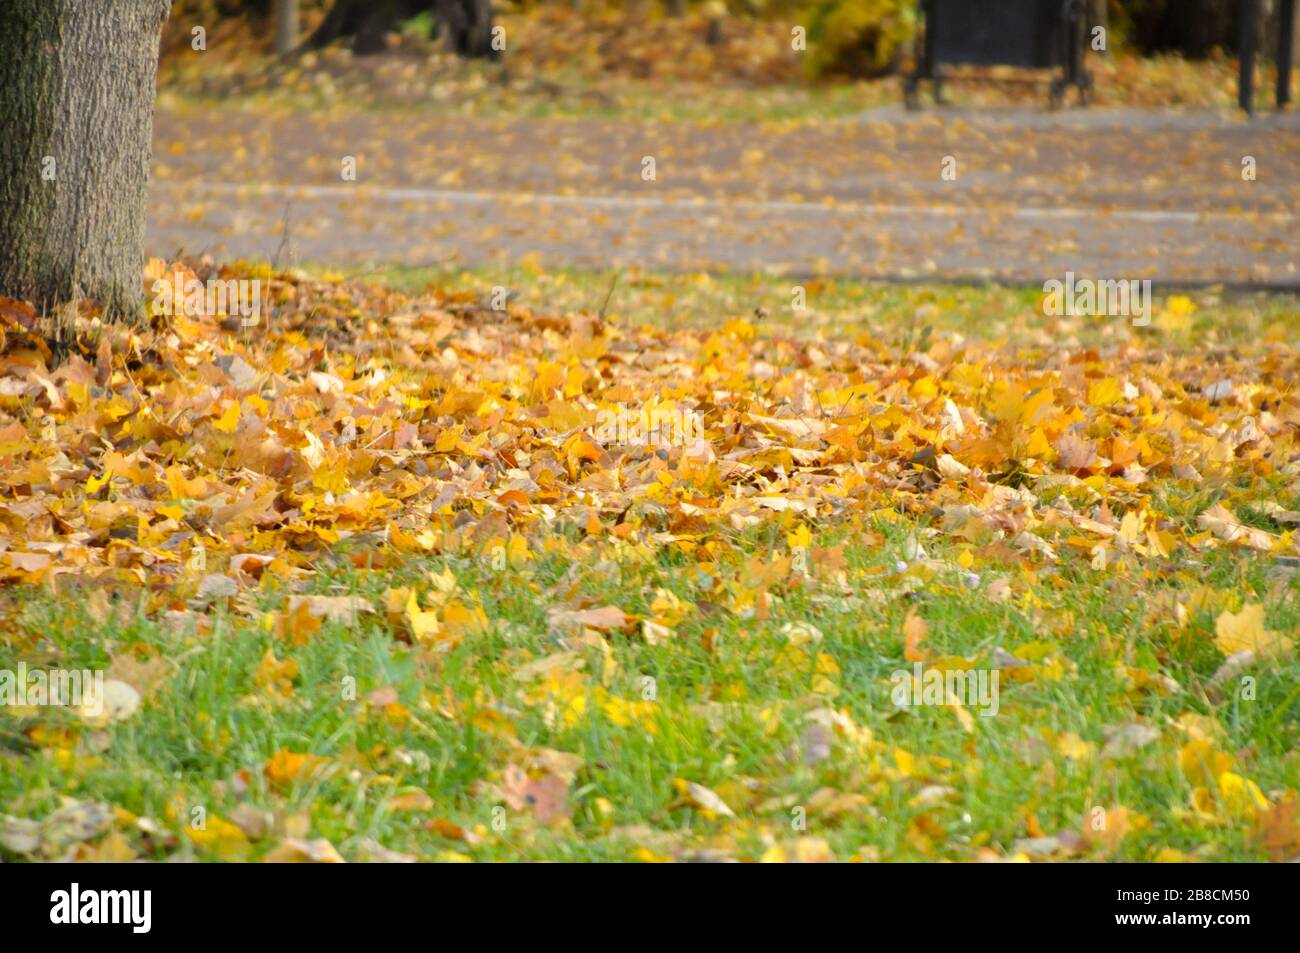 Bright yellow and orange fallen autumn leaves on the ground. Stock Photo